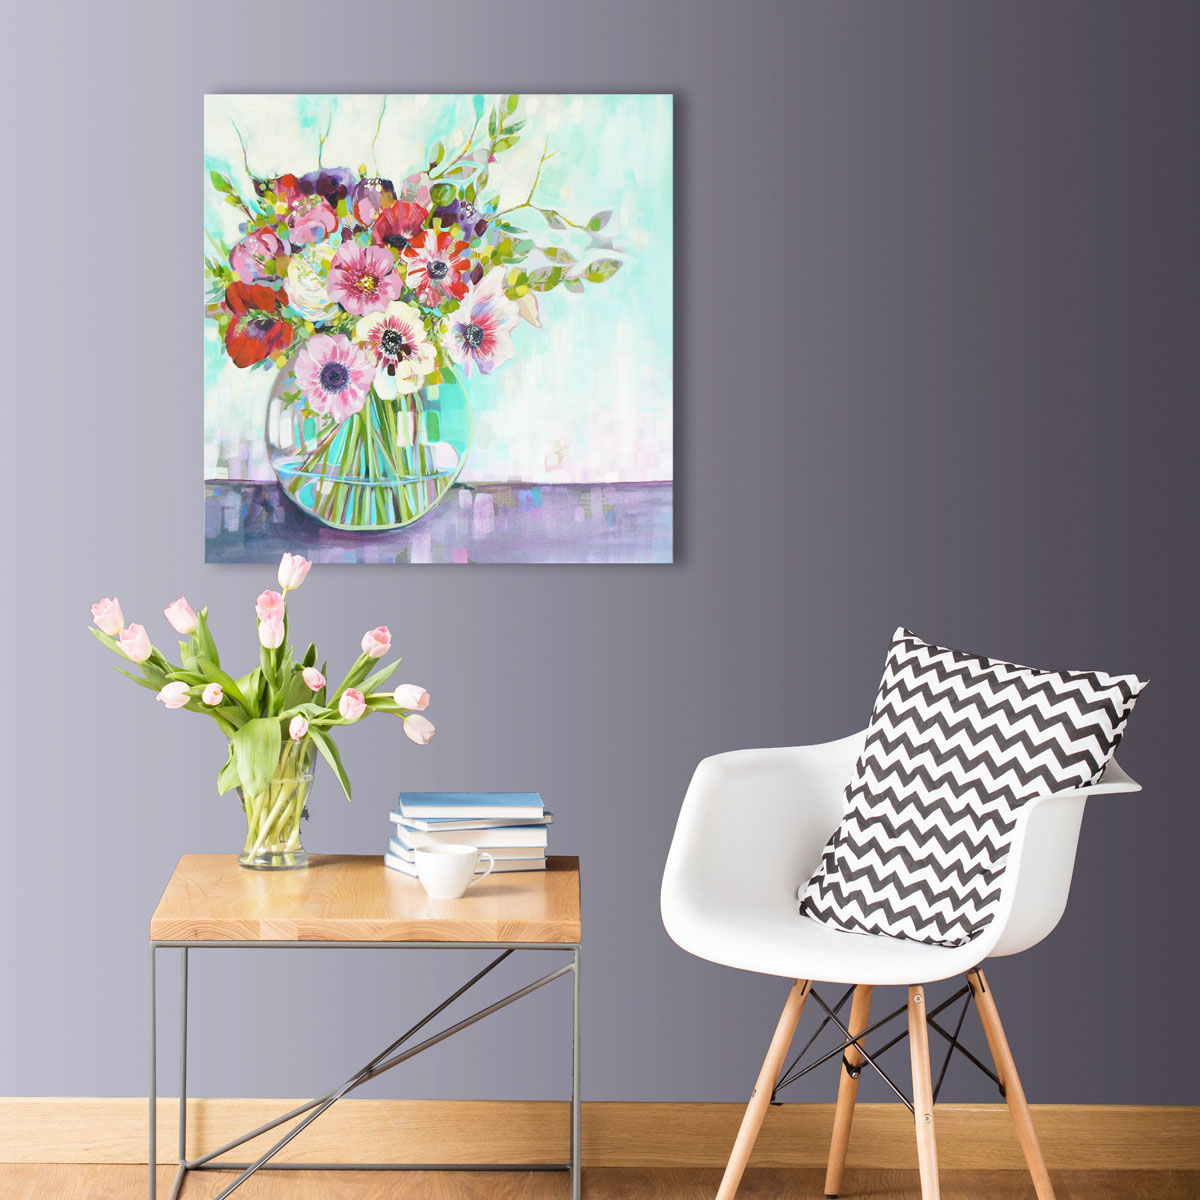 Spring anemones (semi abstract floral / flower painting with collage elements) (2018) Acrylic painting by Carolynne Coulson